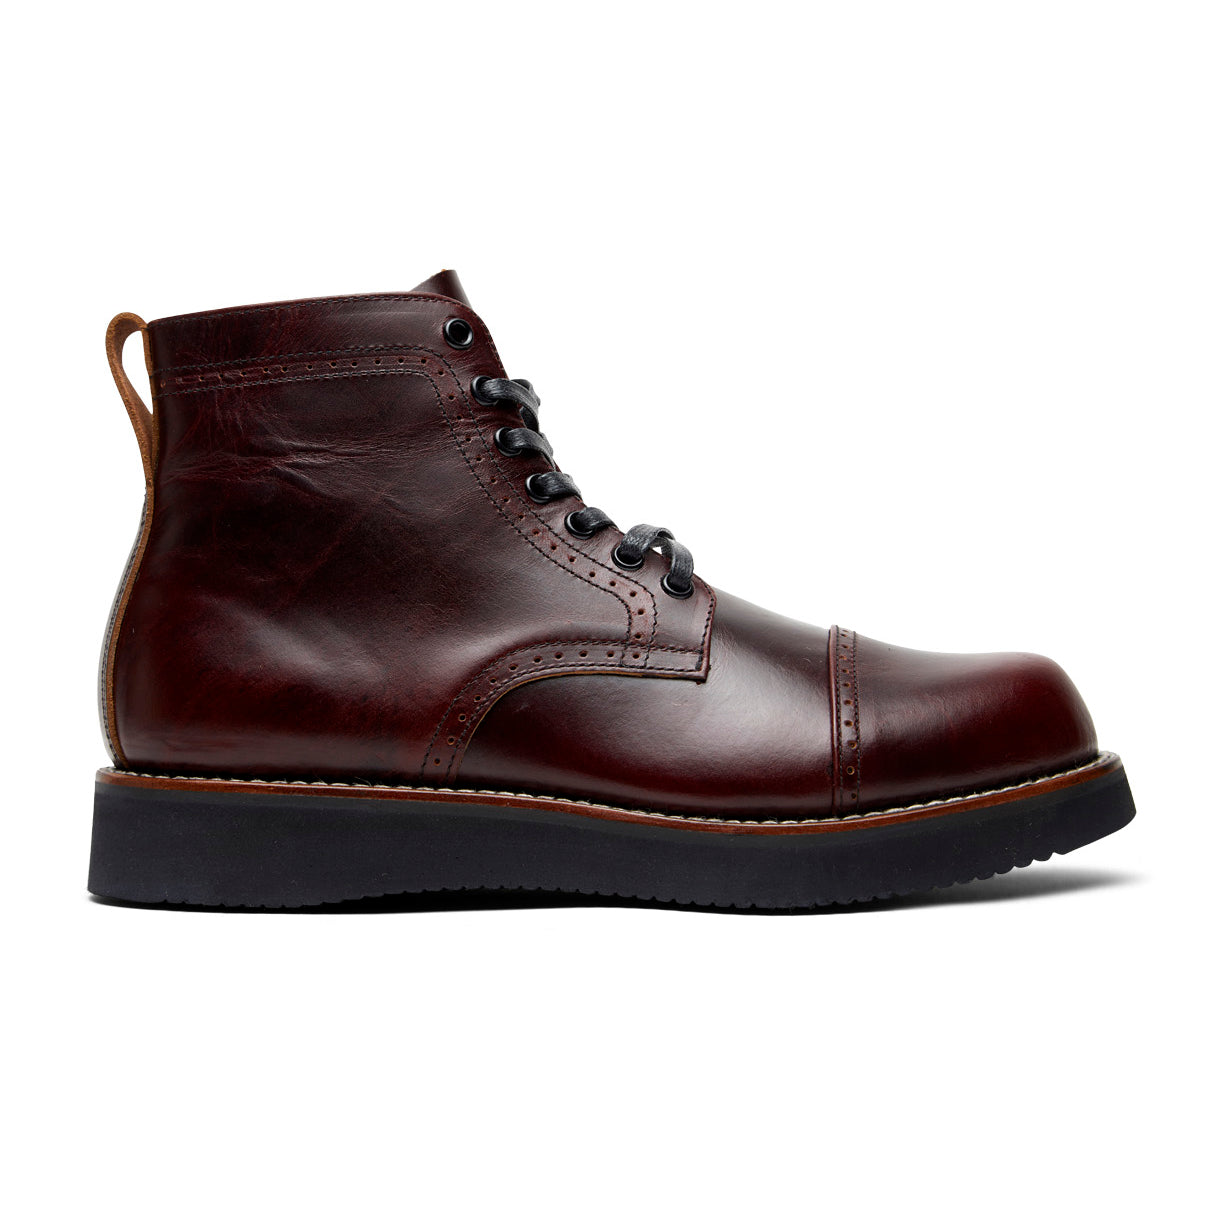 The men's burgundy leather boot from the Aaron collection by Broken Homme is shown on a white background.